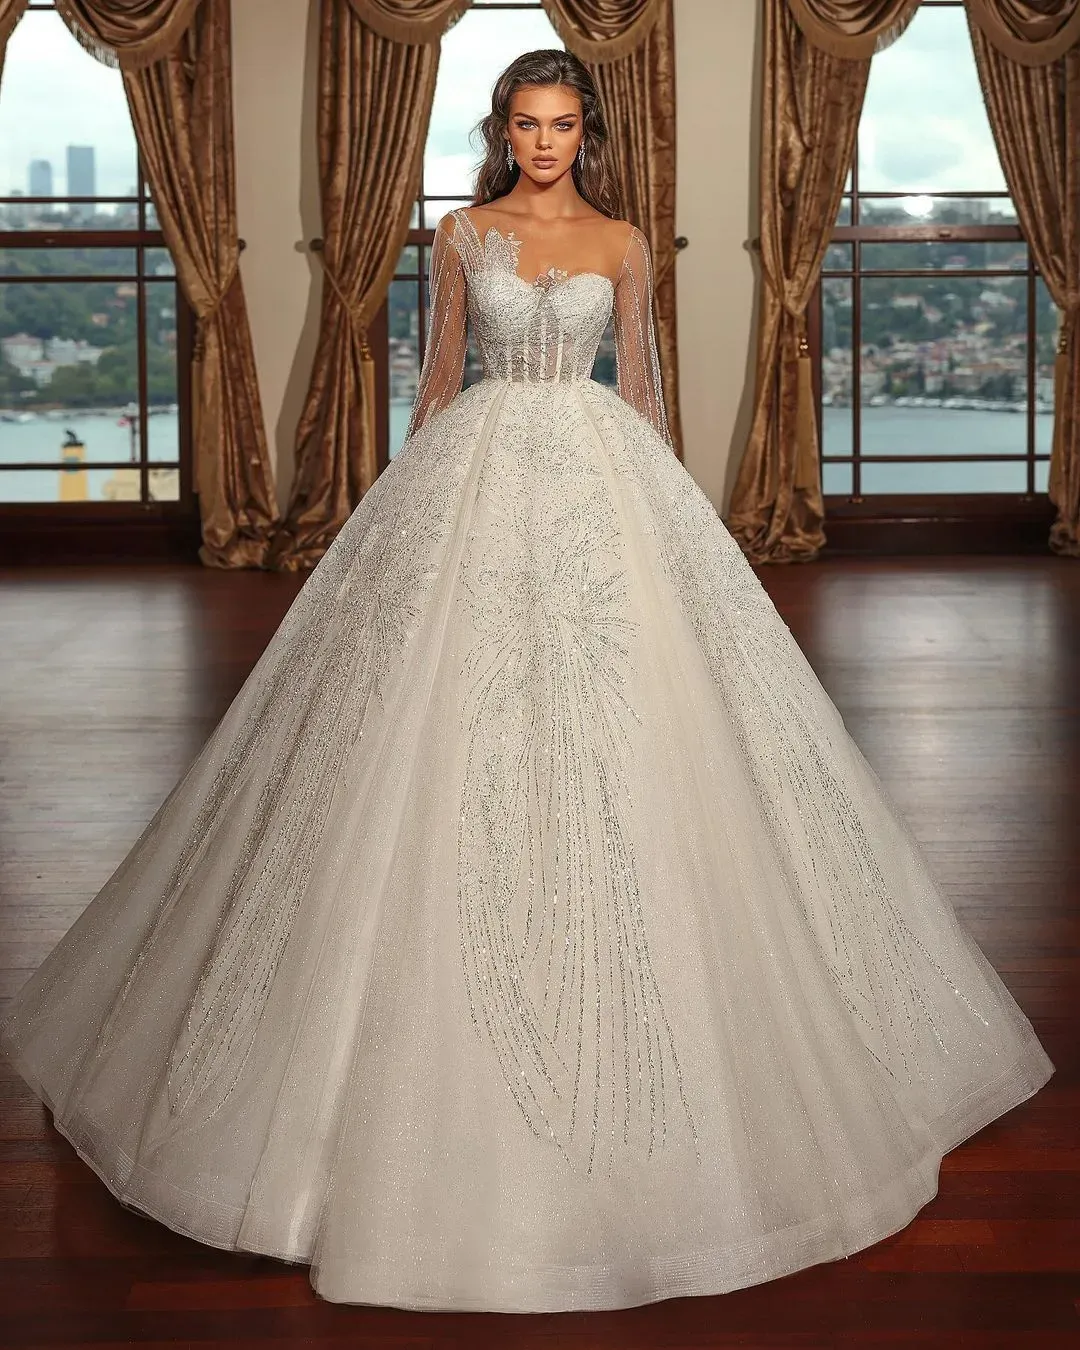 Princess A Line Wedding Dresses Long Sleeves Appliques Lace Bridal Gowns Custom Made Lace-up Back Sweep Train